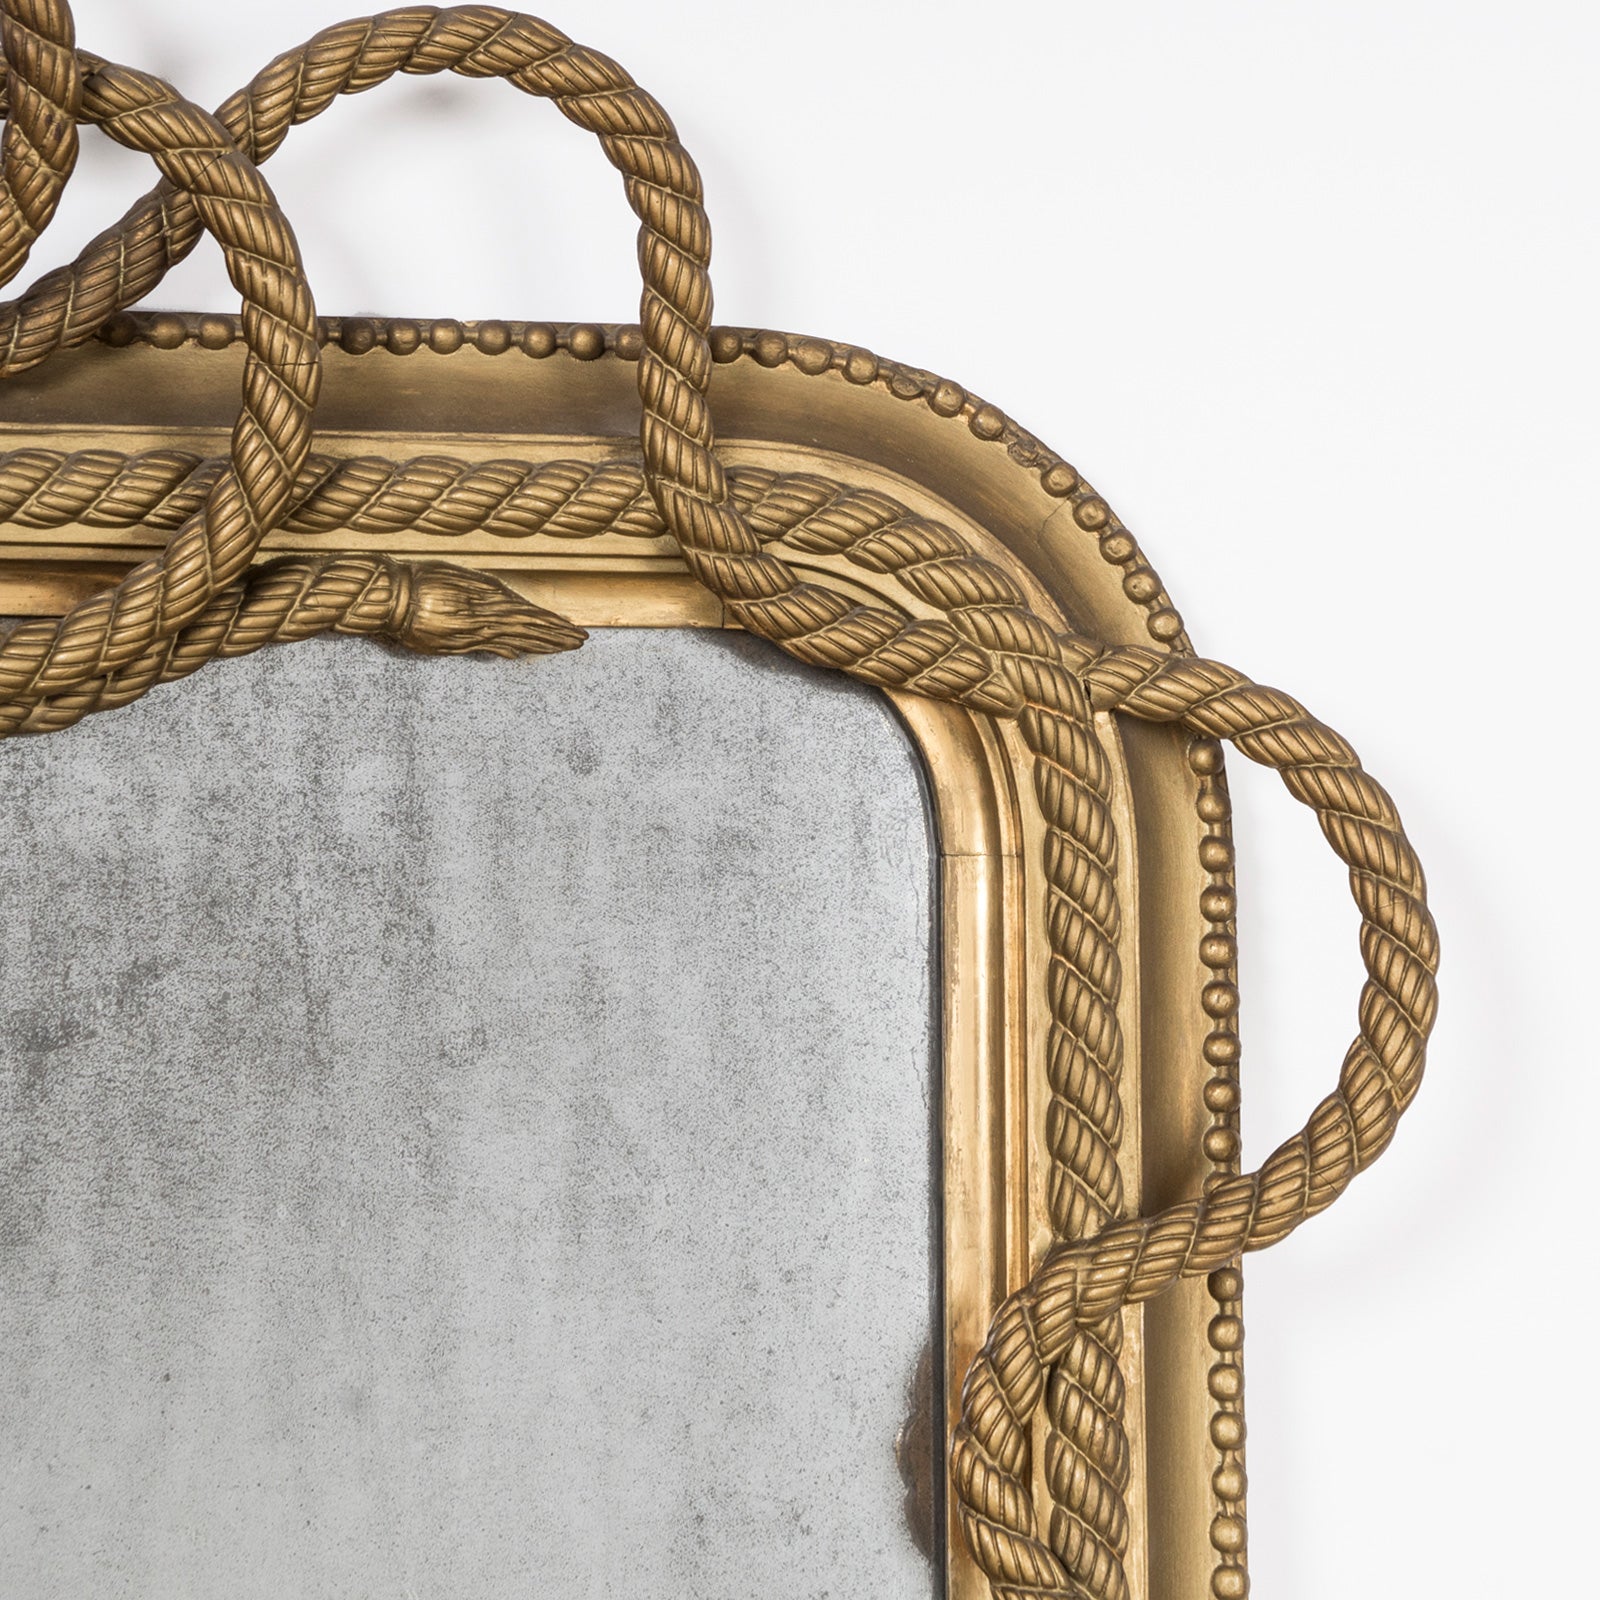 Large 19th C Large Rope and Tassels Motif Mirror